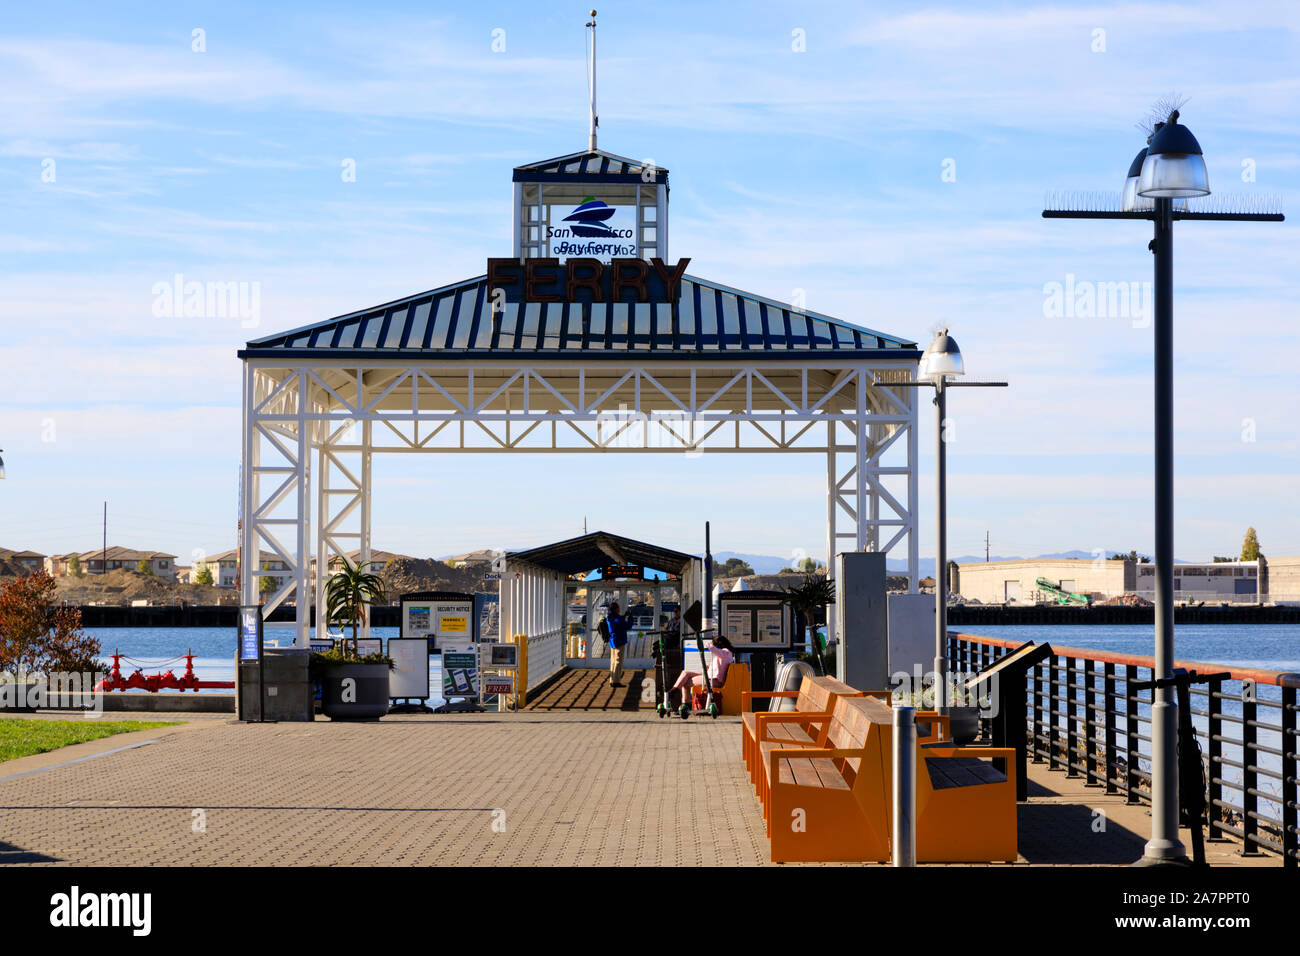 Oakland ferry terminal for the San Francisco Bay Ferry, Jack London Square, Oakland, Alameda County, California, United States of America Stock Photo